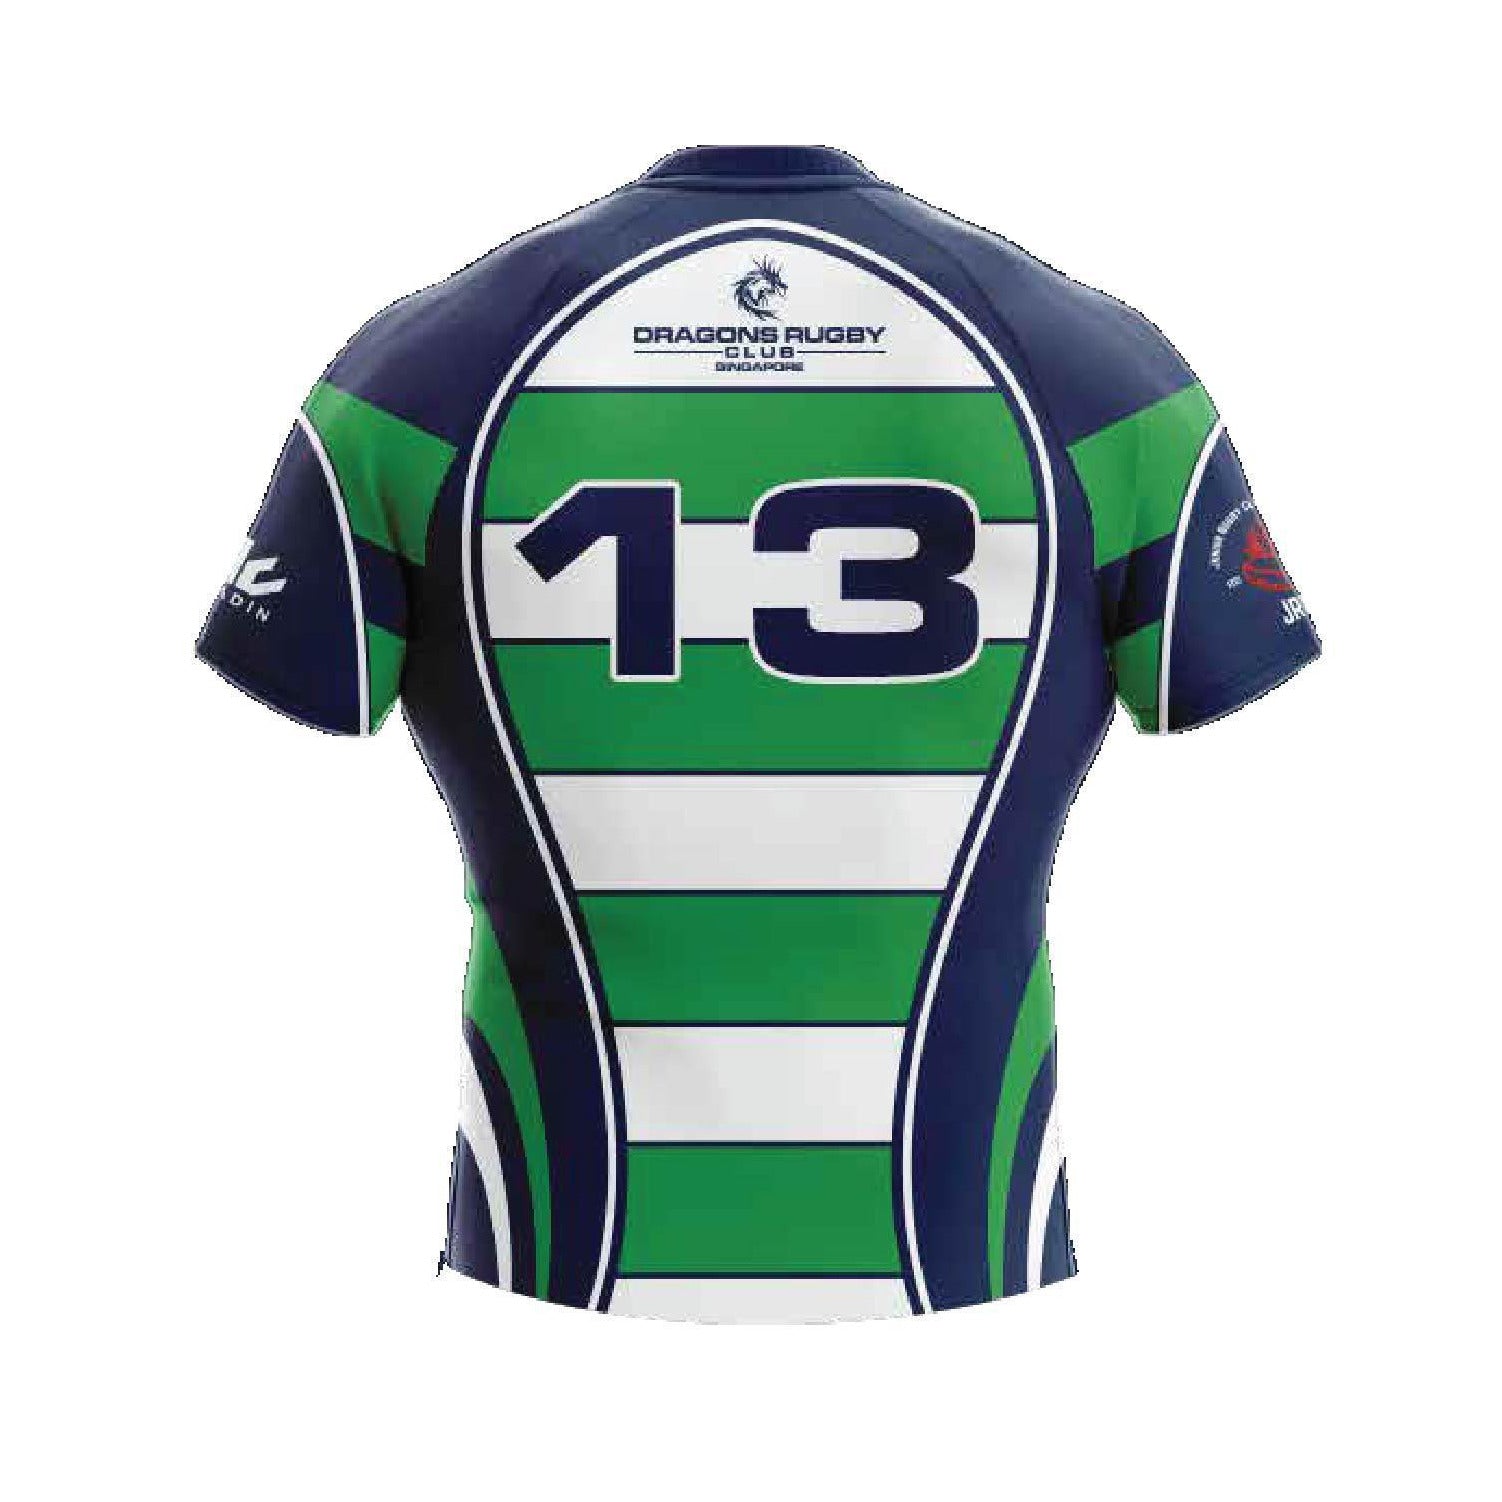 Dragons Rugby Club Jersey – ARENA TEAMWEAR